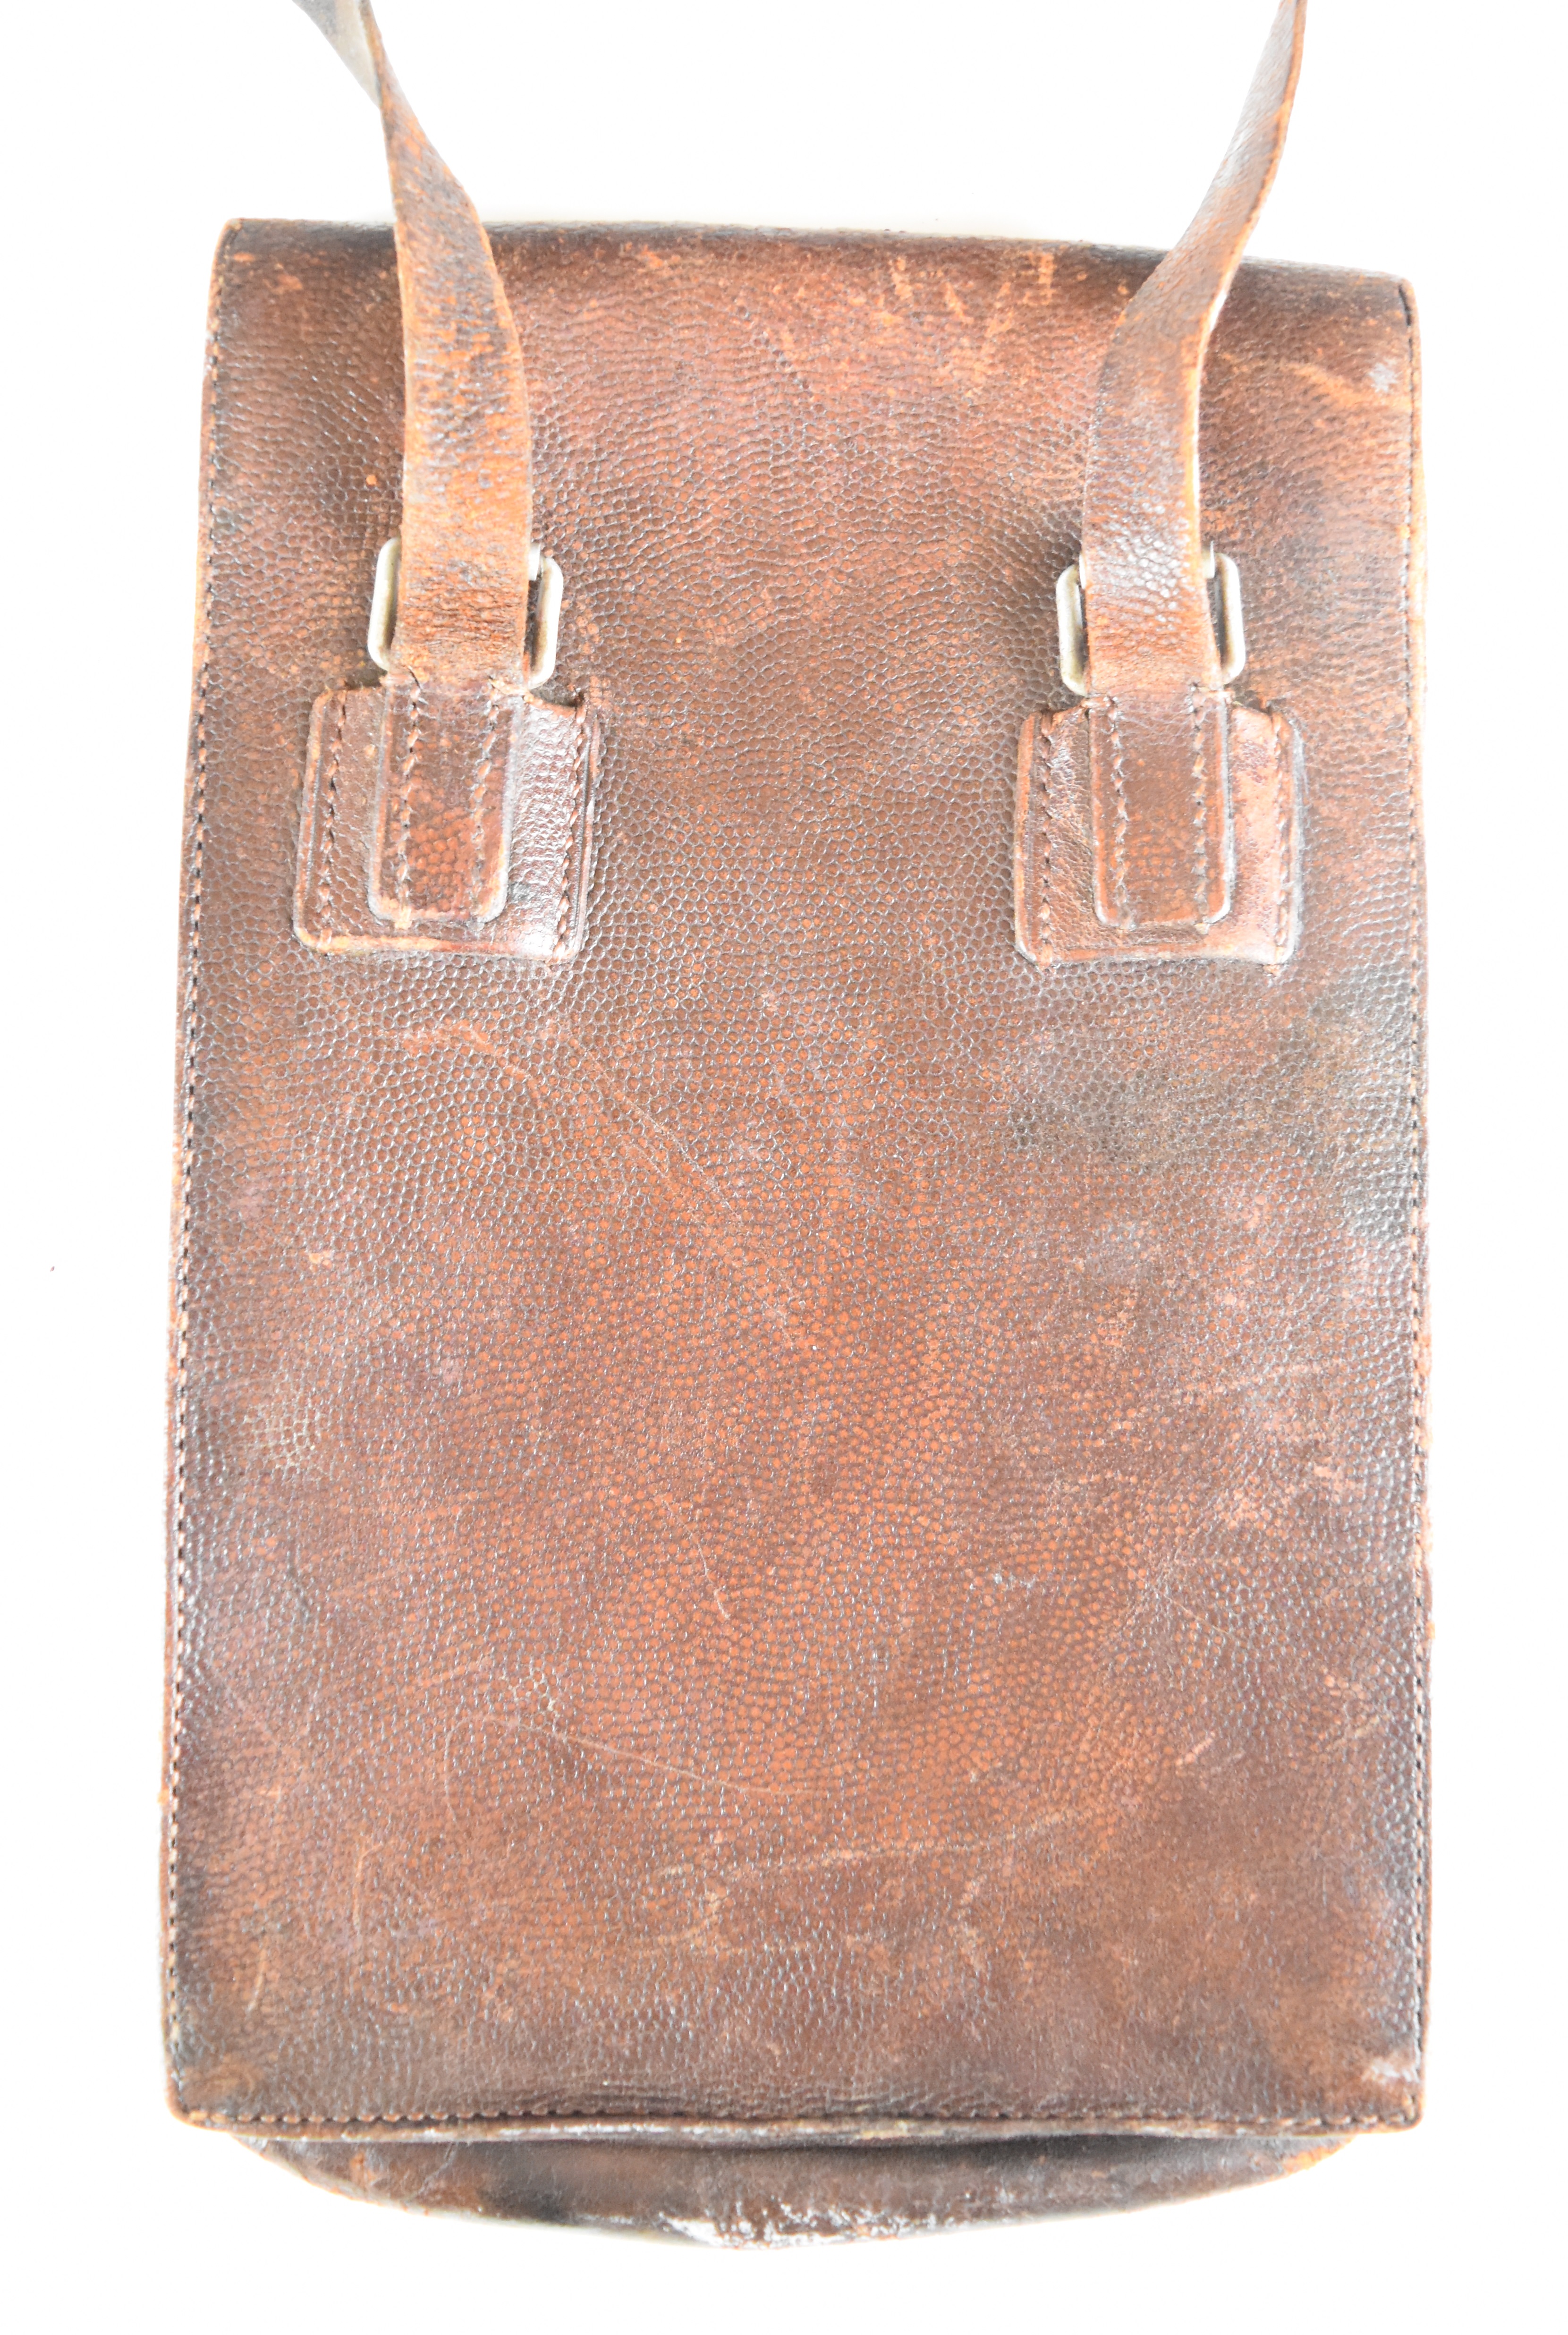 German WW2 brown leather map case with two section inner, leather securing straps and alloy buckles - Image 4 of 4